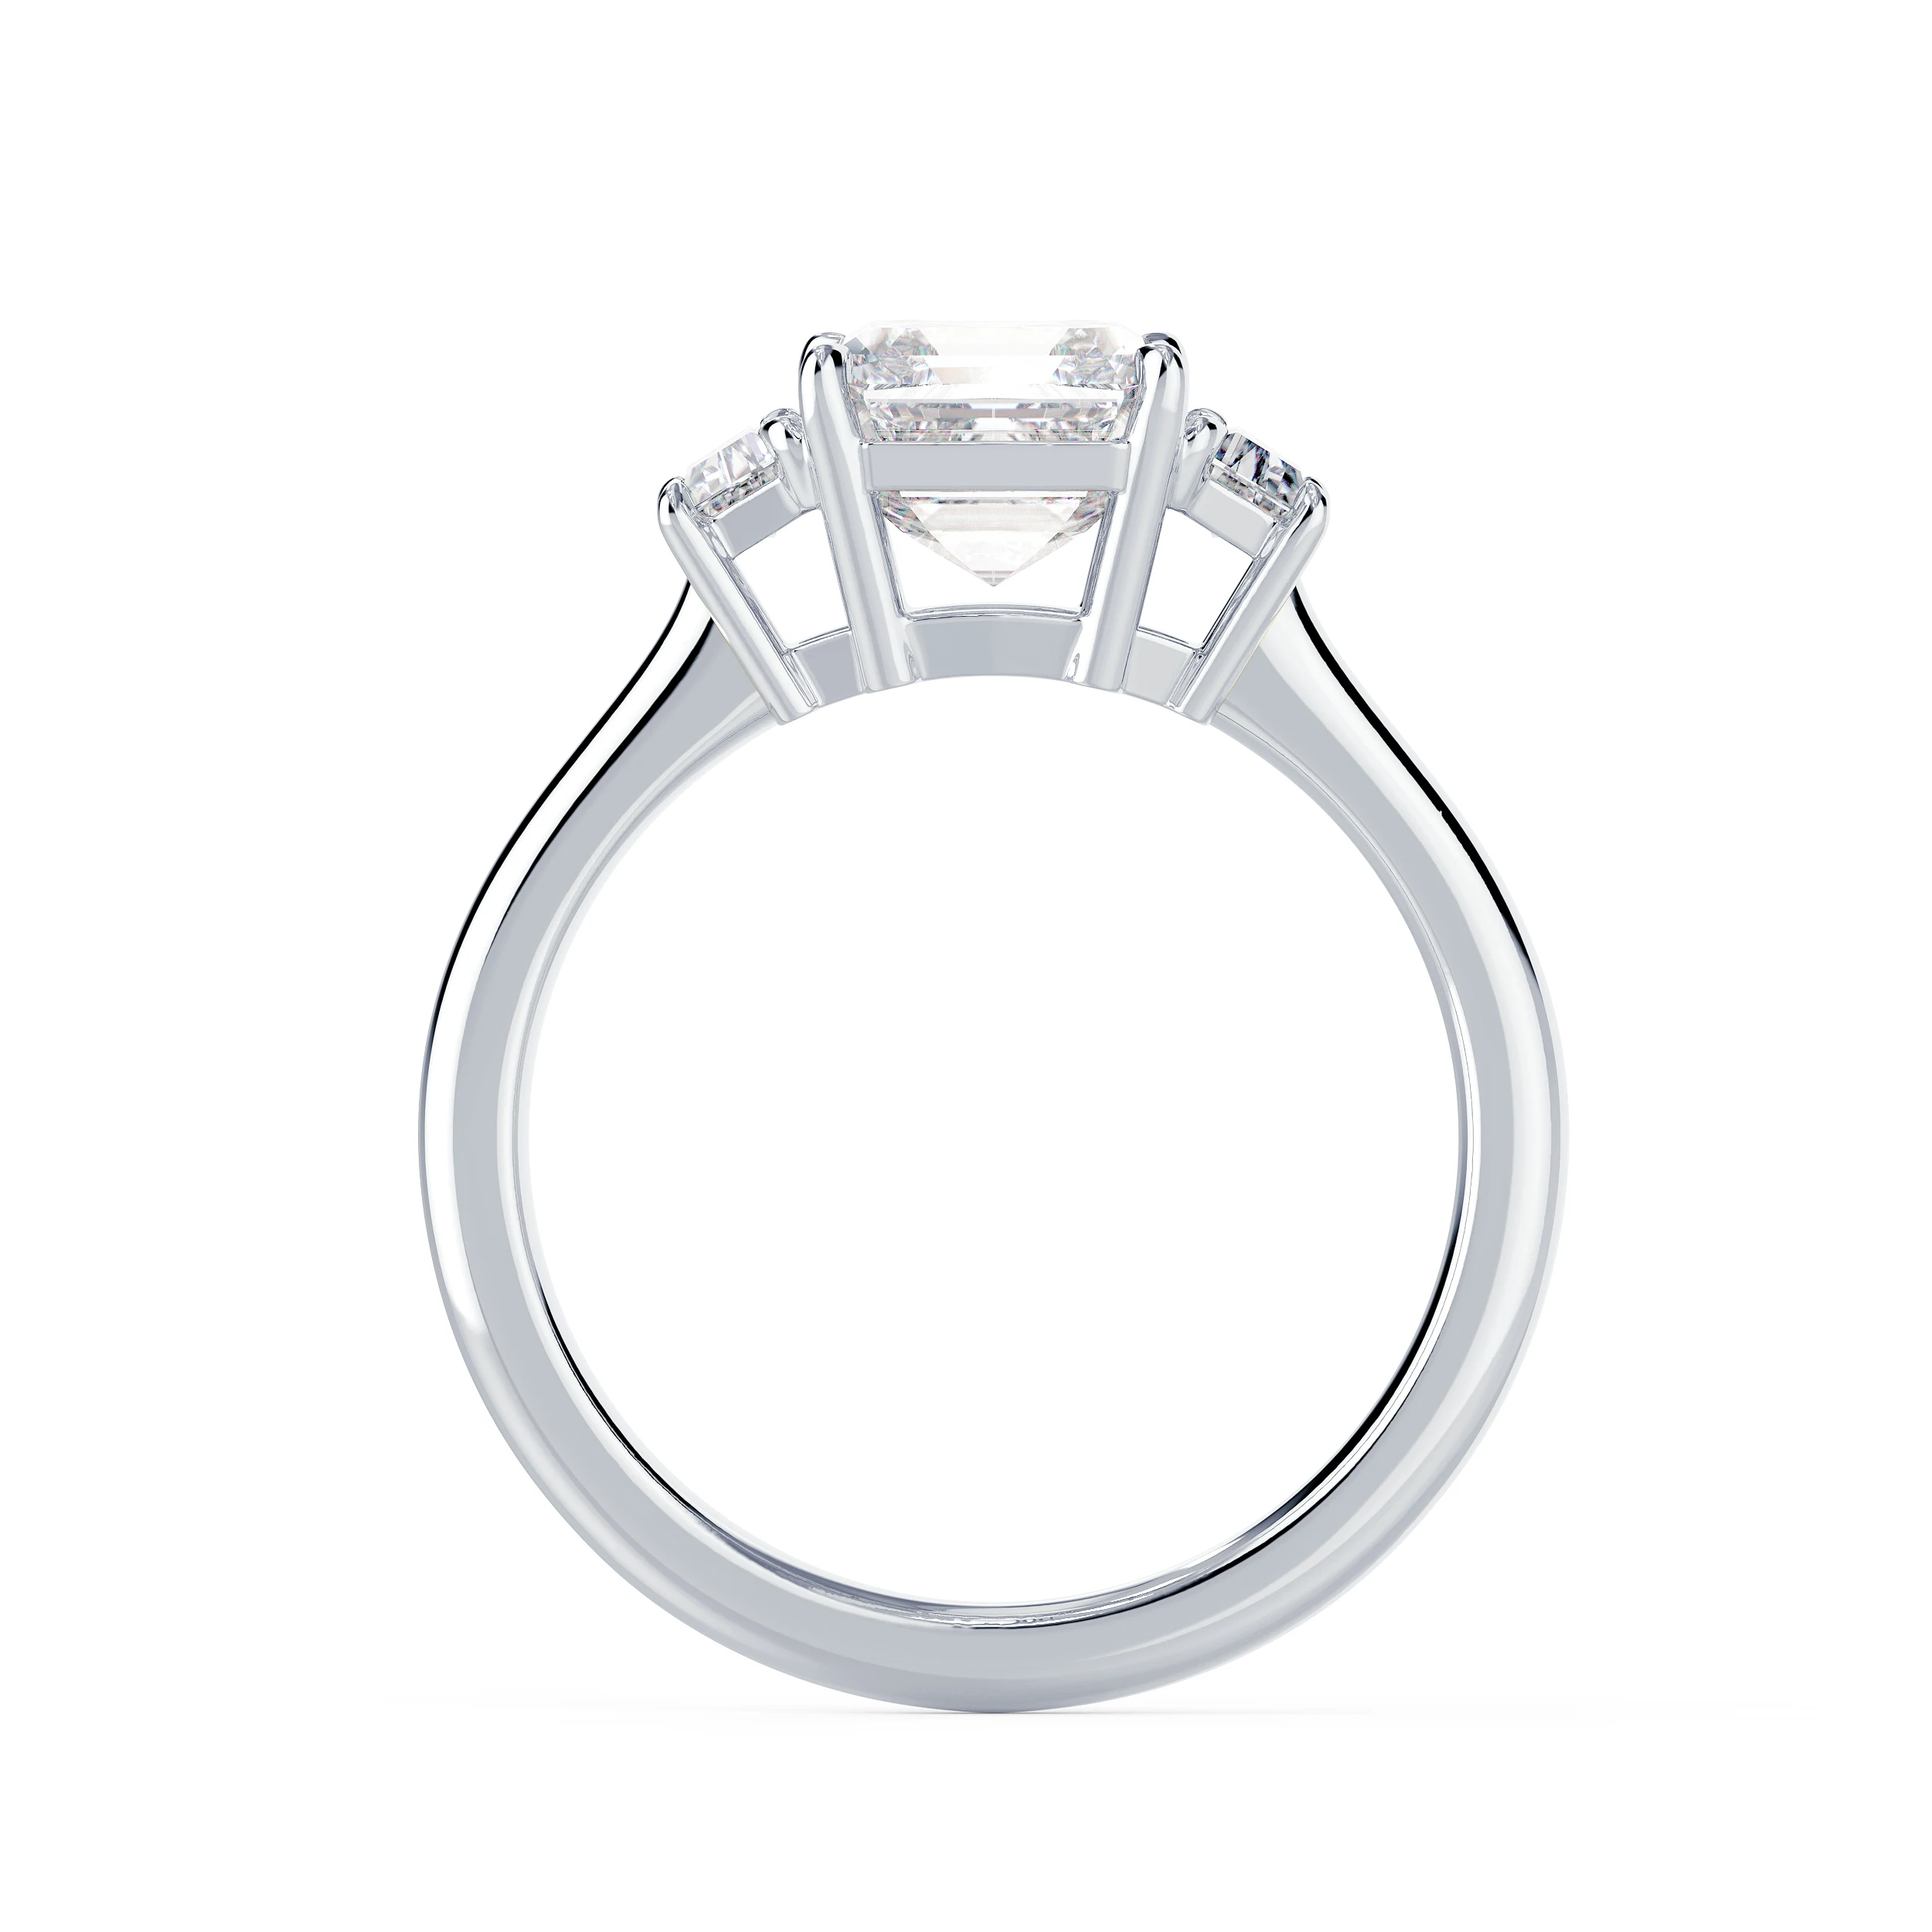 White Gold Asscher and Trapezoid Setting featuring Exceptional Quality Created Diamonds (Profile View)